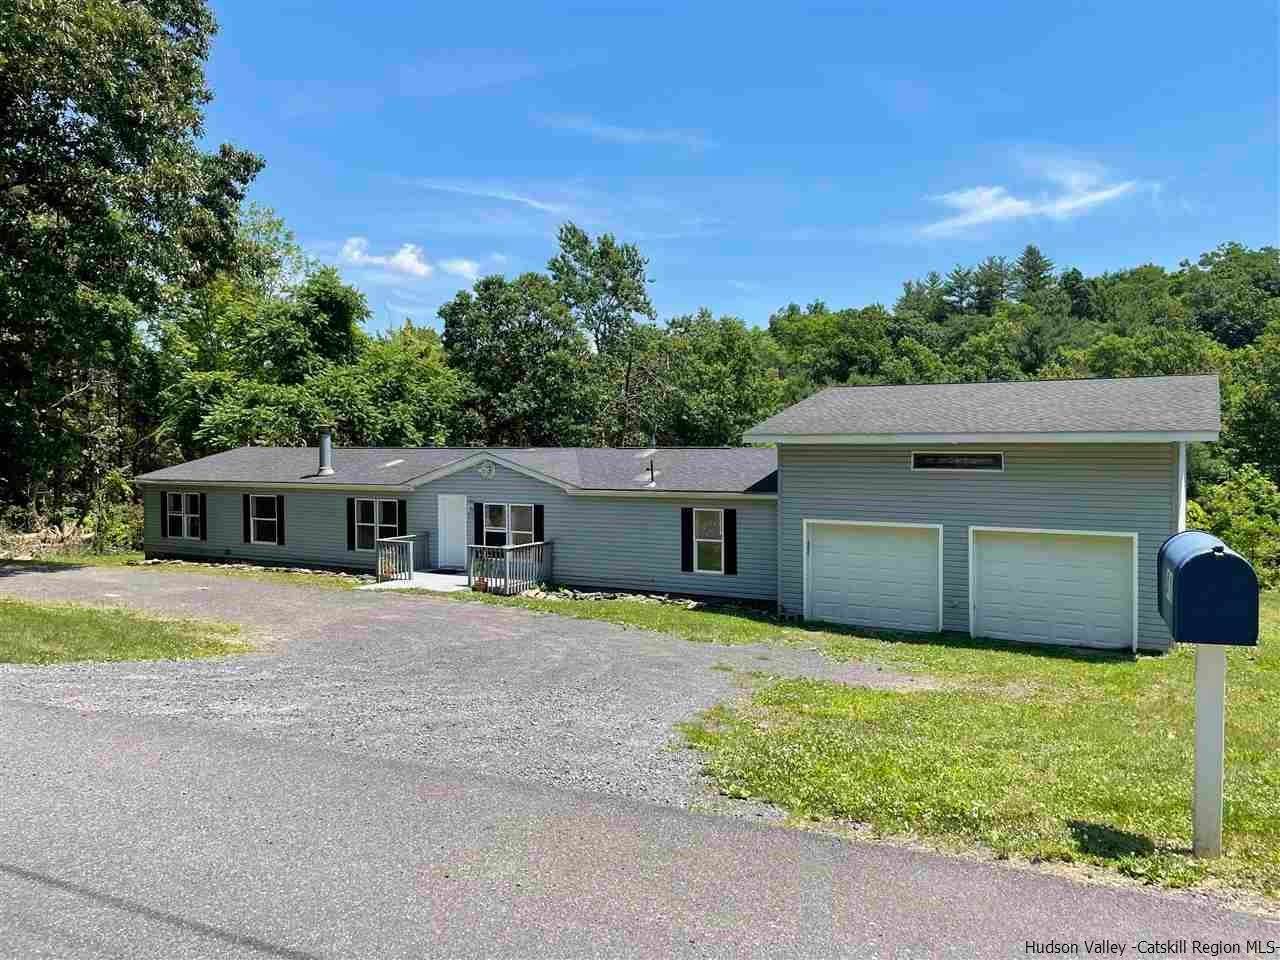 2. Single Family Homes for Sale at 41 Fortune Valley Lane Saugerties, New York 12477 United States